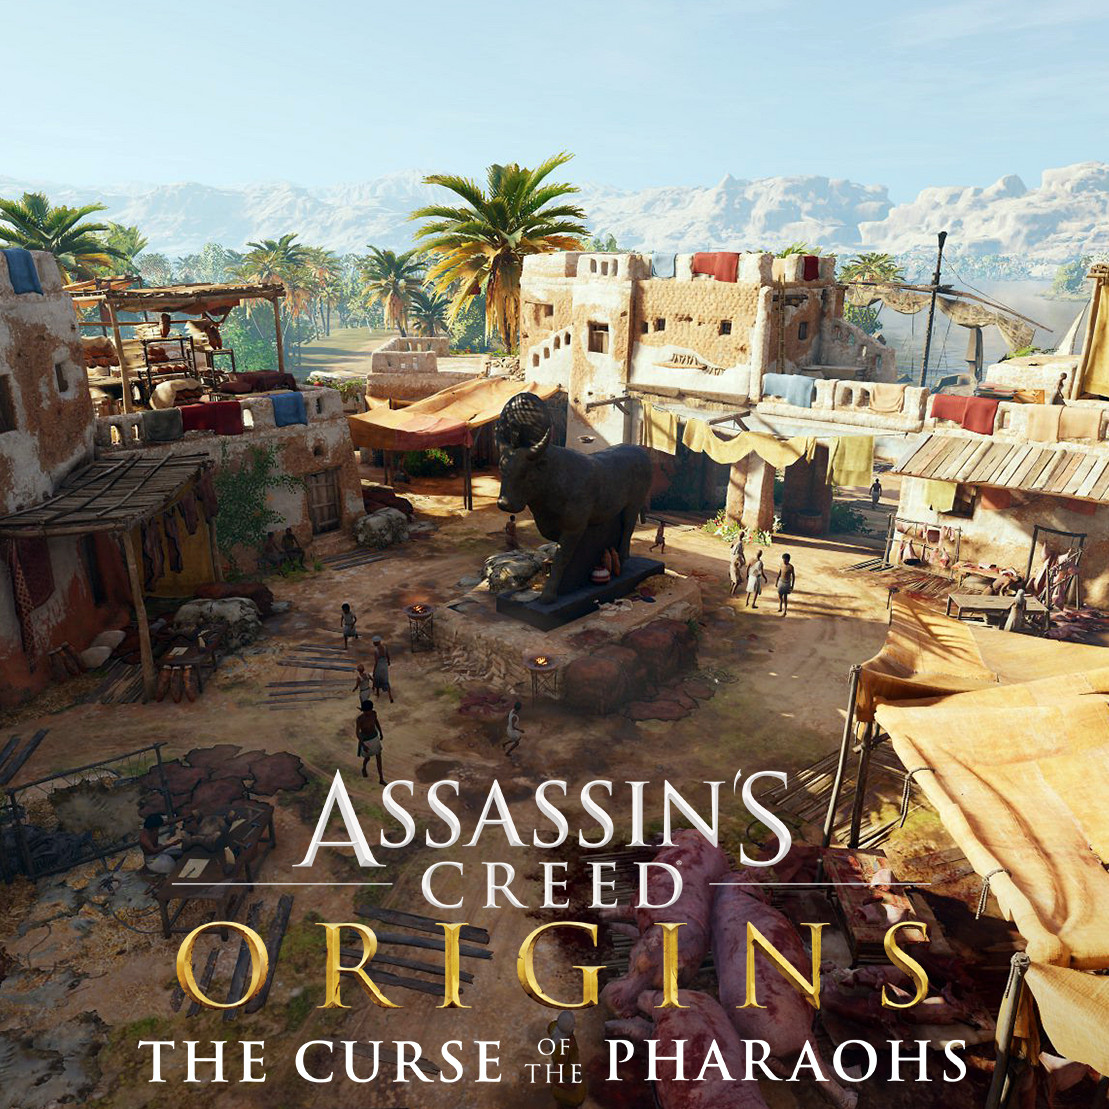 ArtStation - Assassin's Creed Origins - The curse of the pharaohs DLC  Thematic Locations